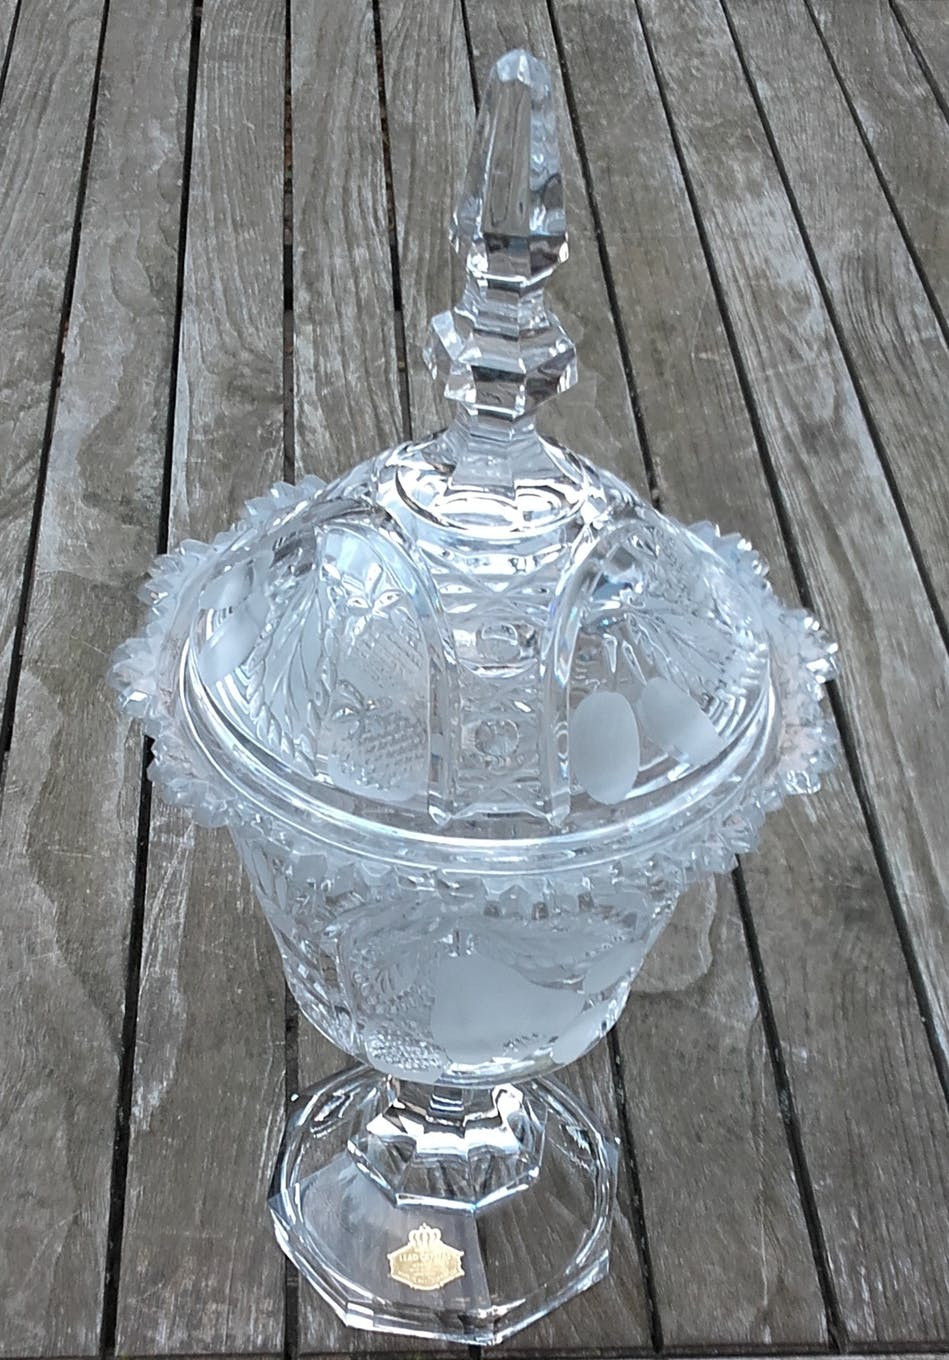 16 Lovely Cristal D Arques Lead Crystal Vase 2024 free download cristal d arques lead crystal vase of trac2a8s grande bonbonniac2a8re lead crystalhand cut west germany with regard to trac2a8s grande bonbonniac2a8re lead crystalhand cut west germany crist